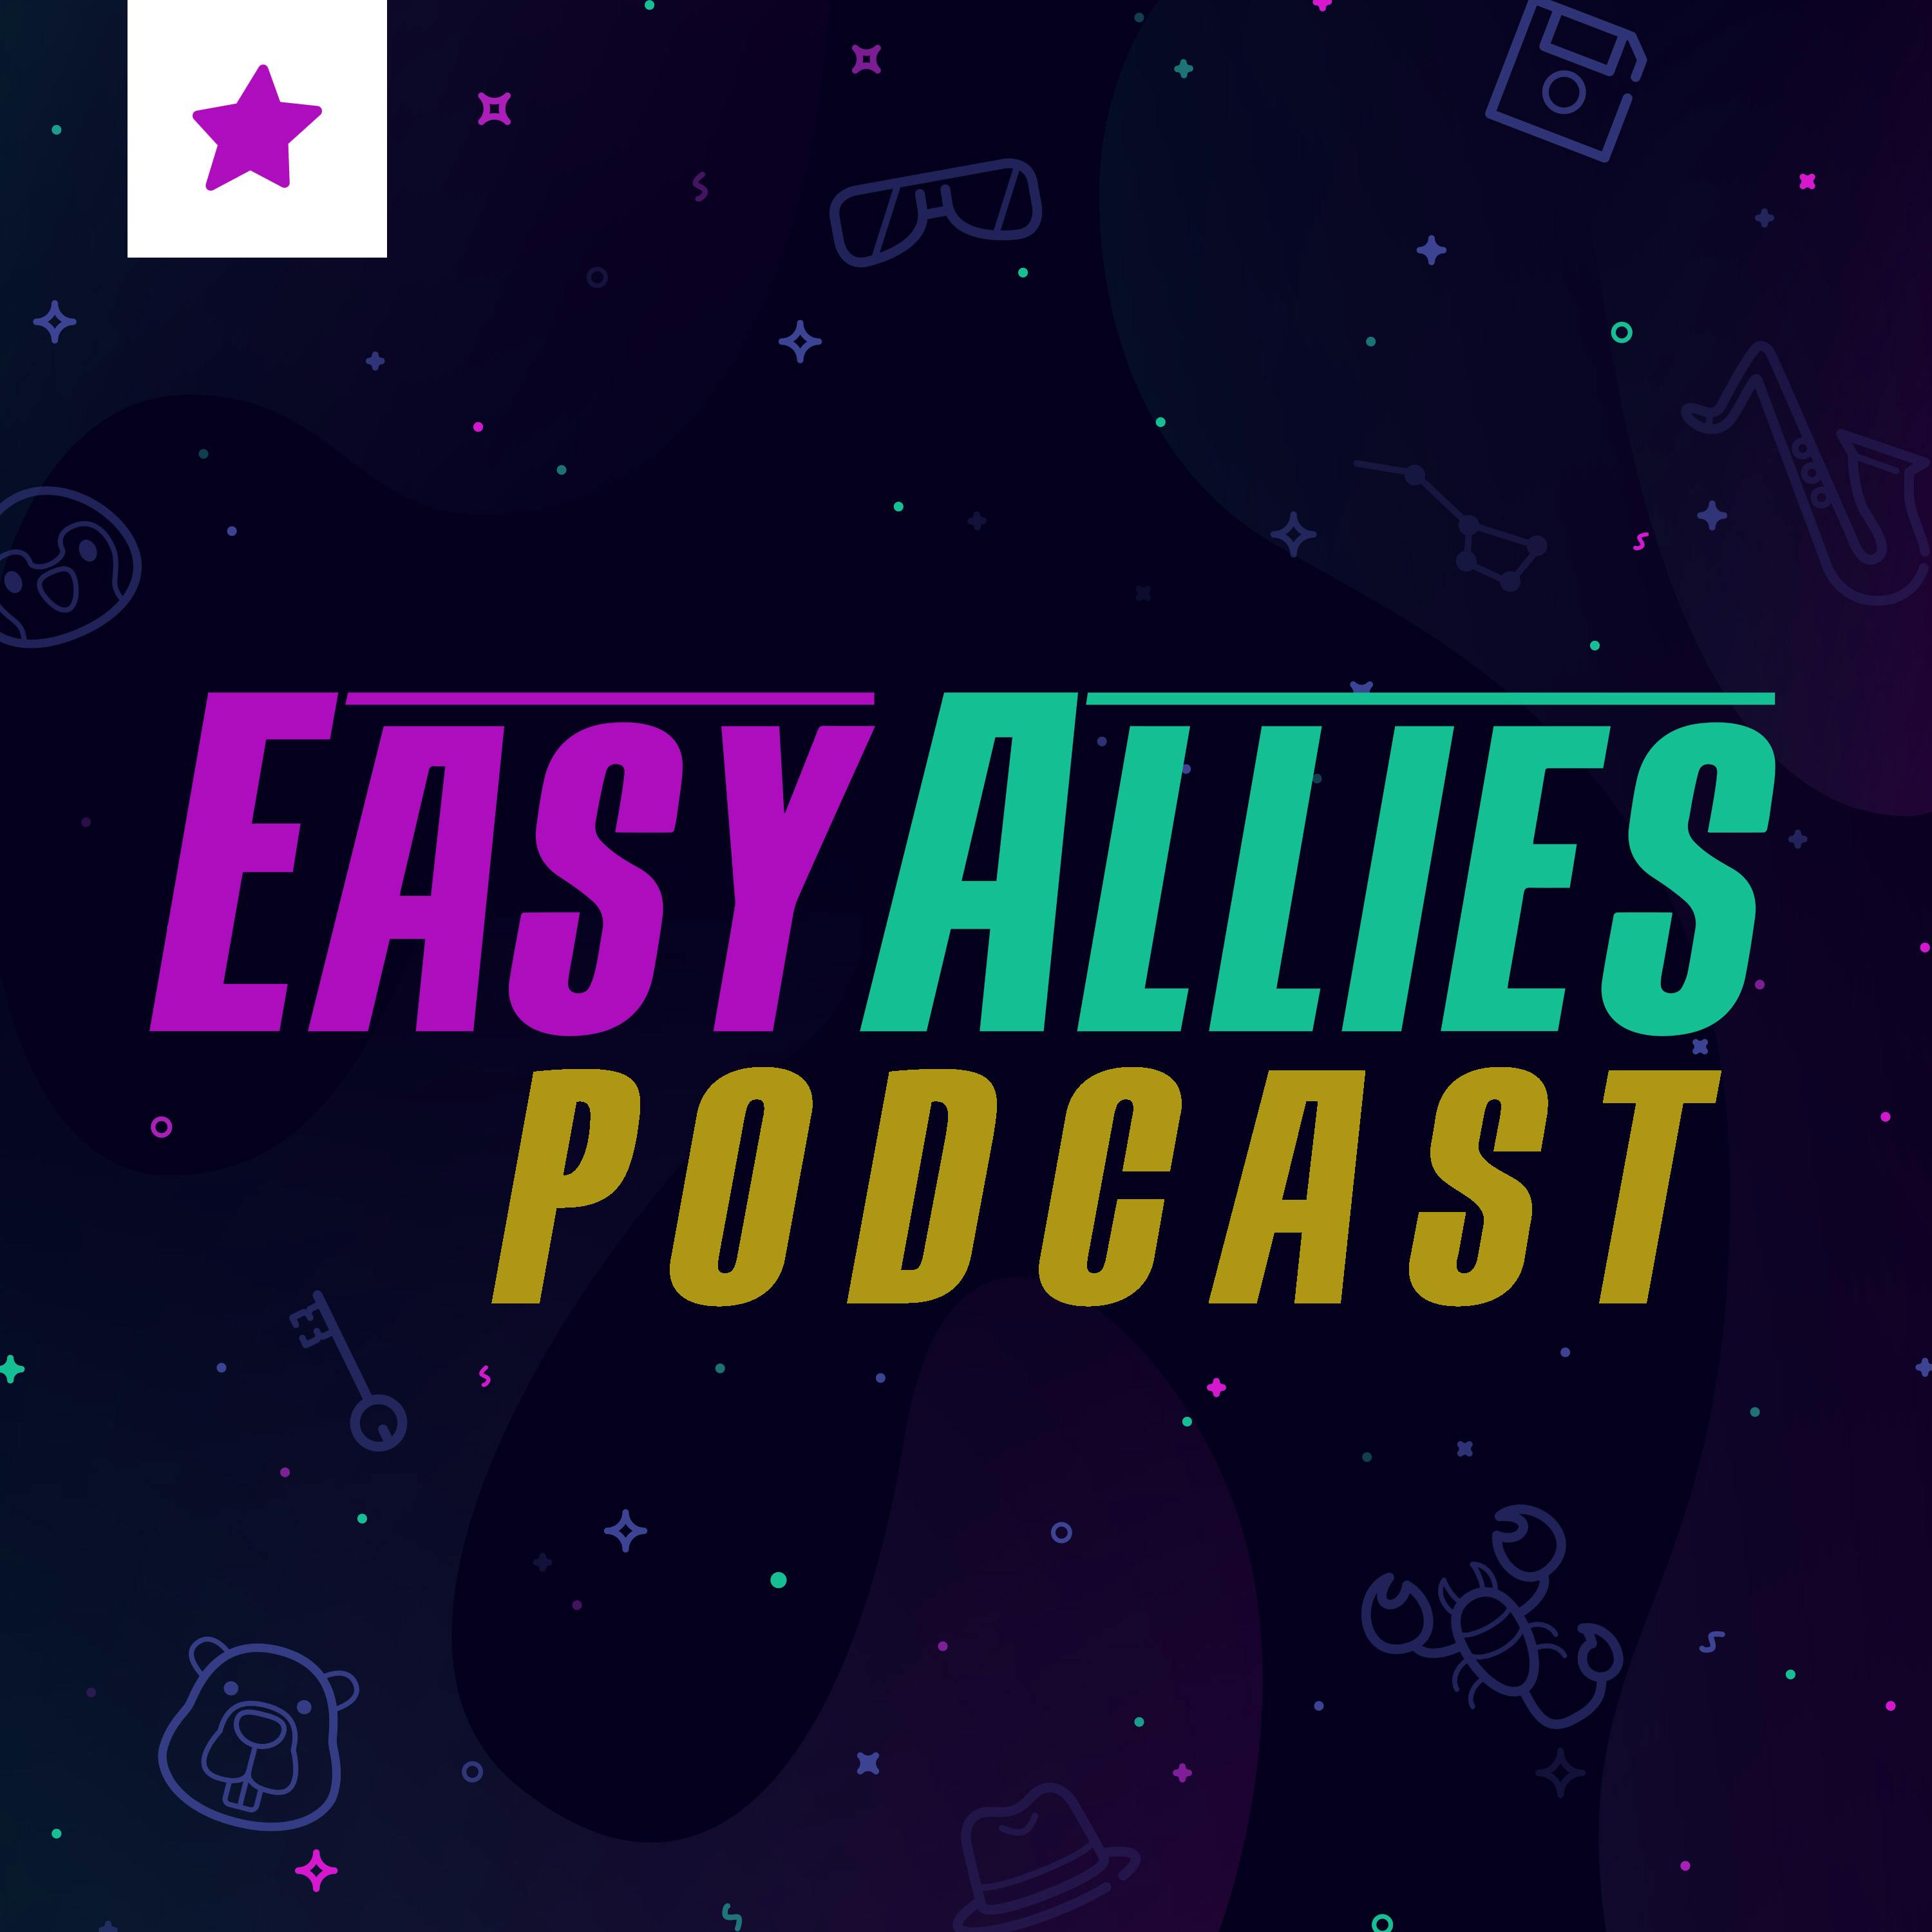 No Rest For the Layoffs - Easy Allies Podcast - Mar 1, 2024